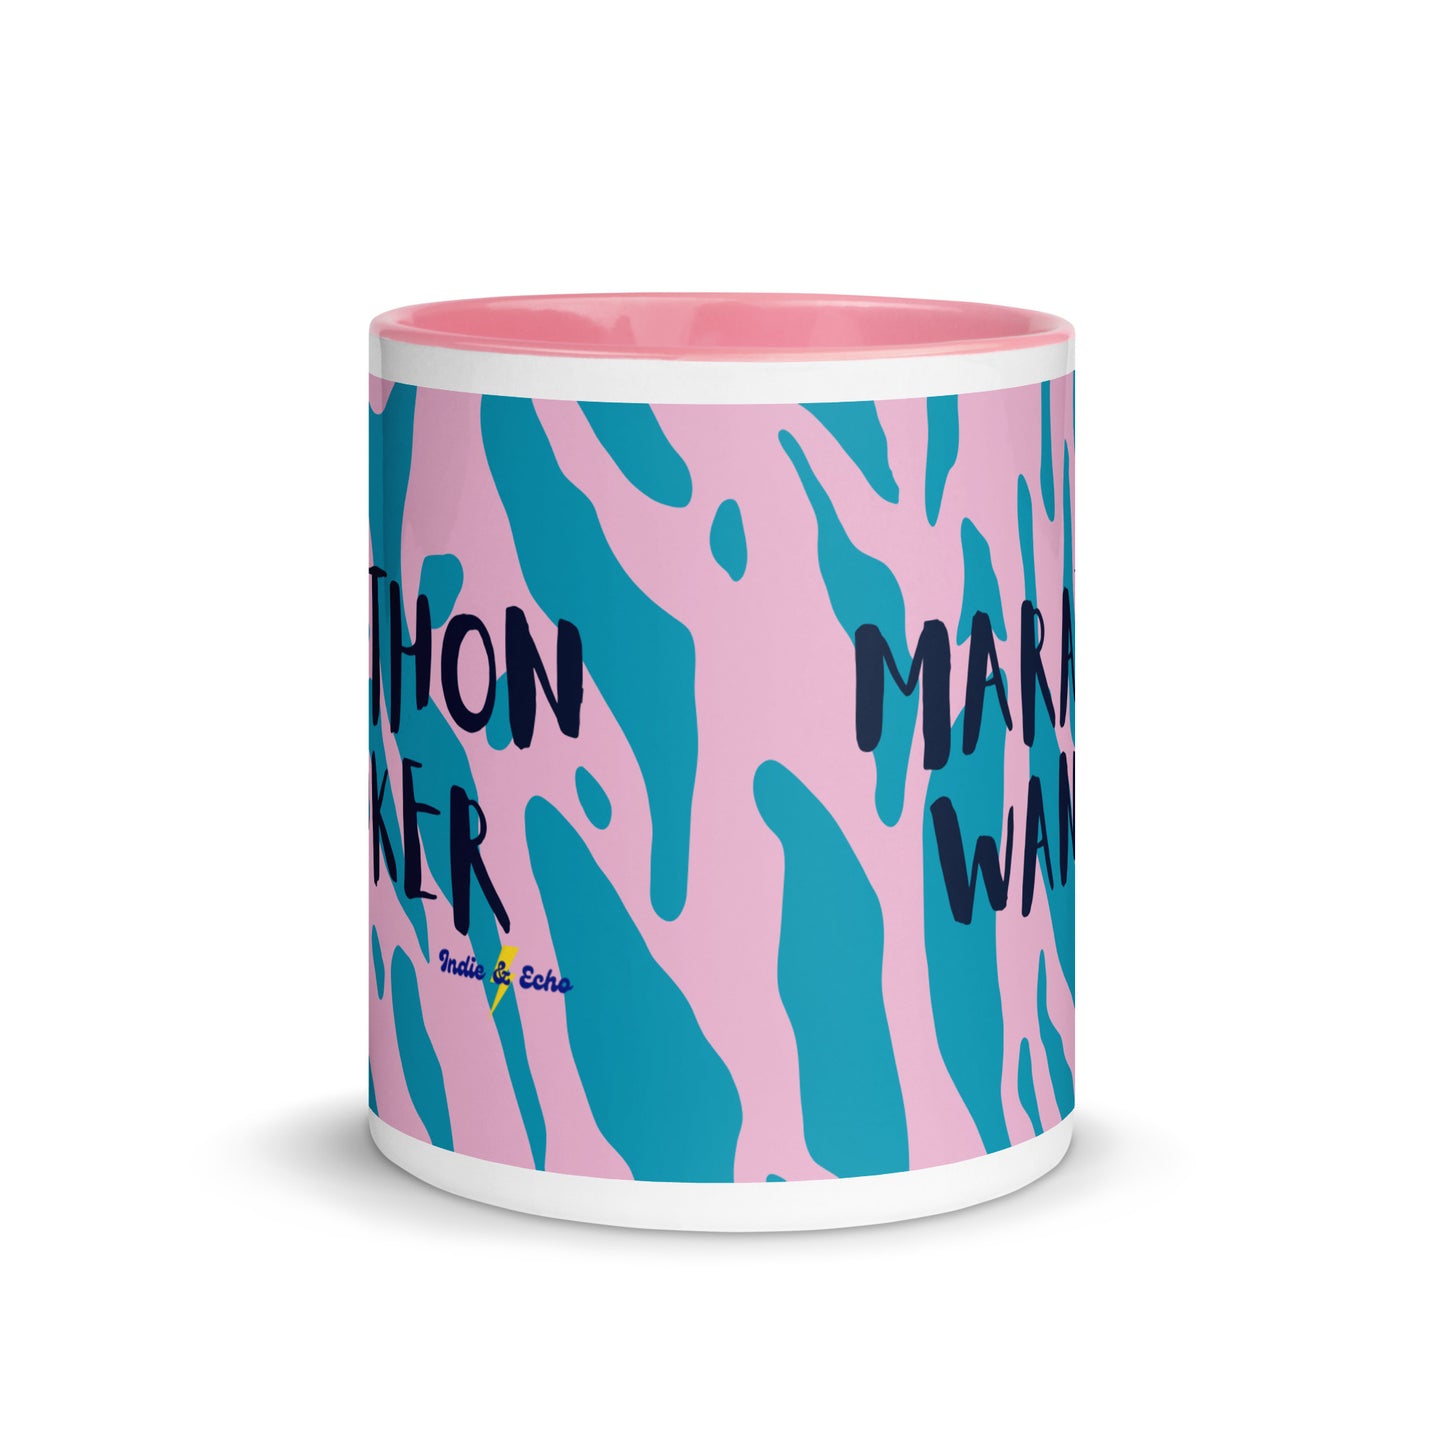 pink and white mug with marathon wanker in a bold, capitalised font over a blue and pink animal print background. 